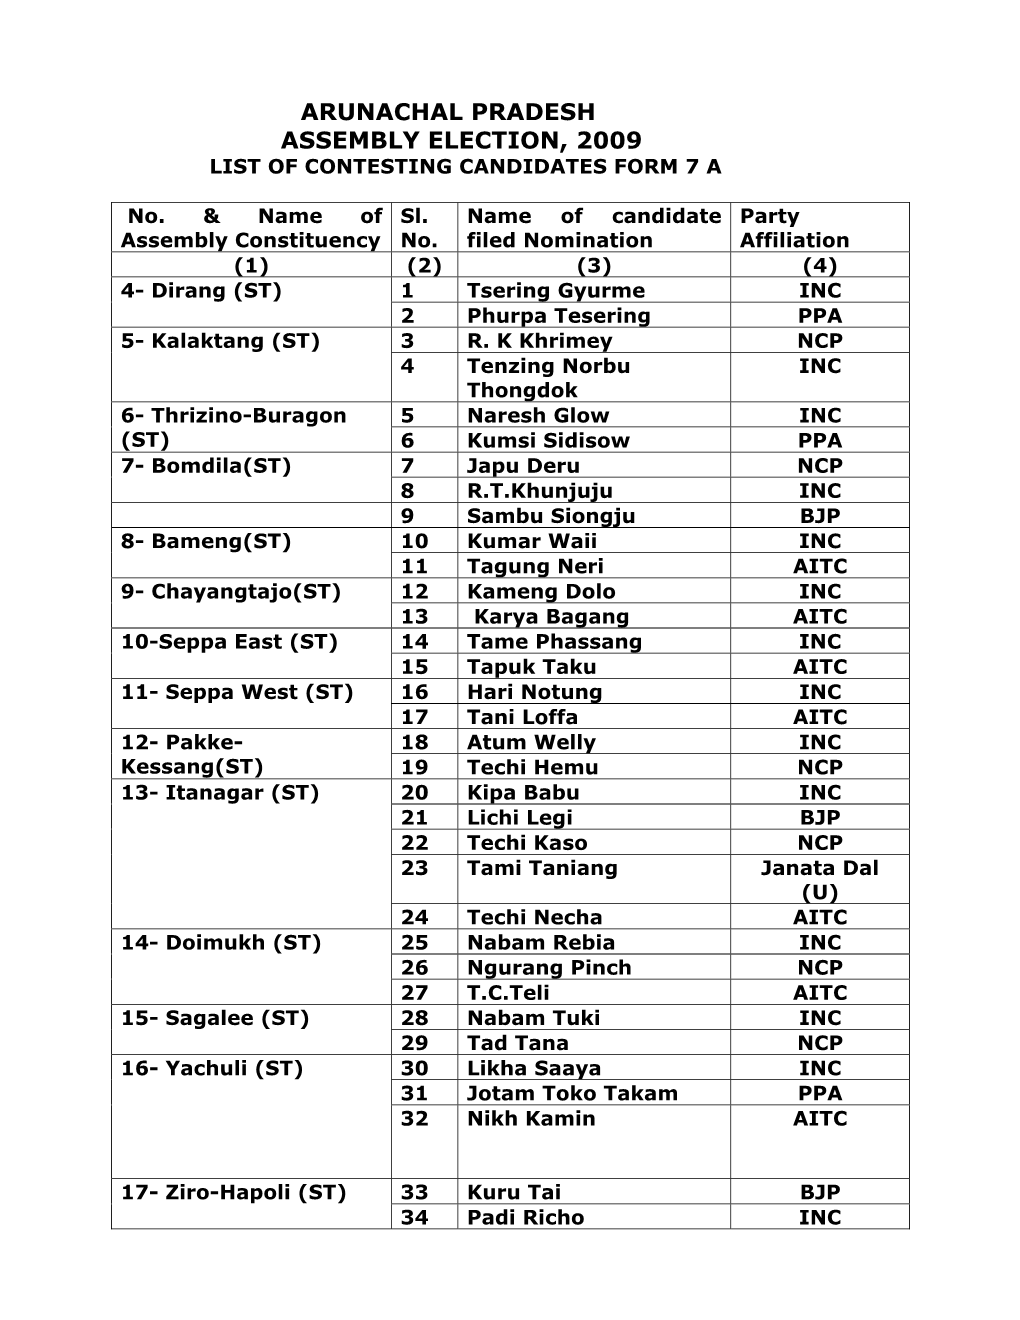 Arunachal Pradesh Assembly Election, 2009 List of Contesting Candidates Form 7 A